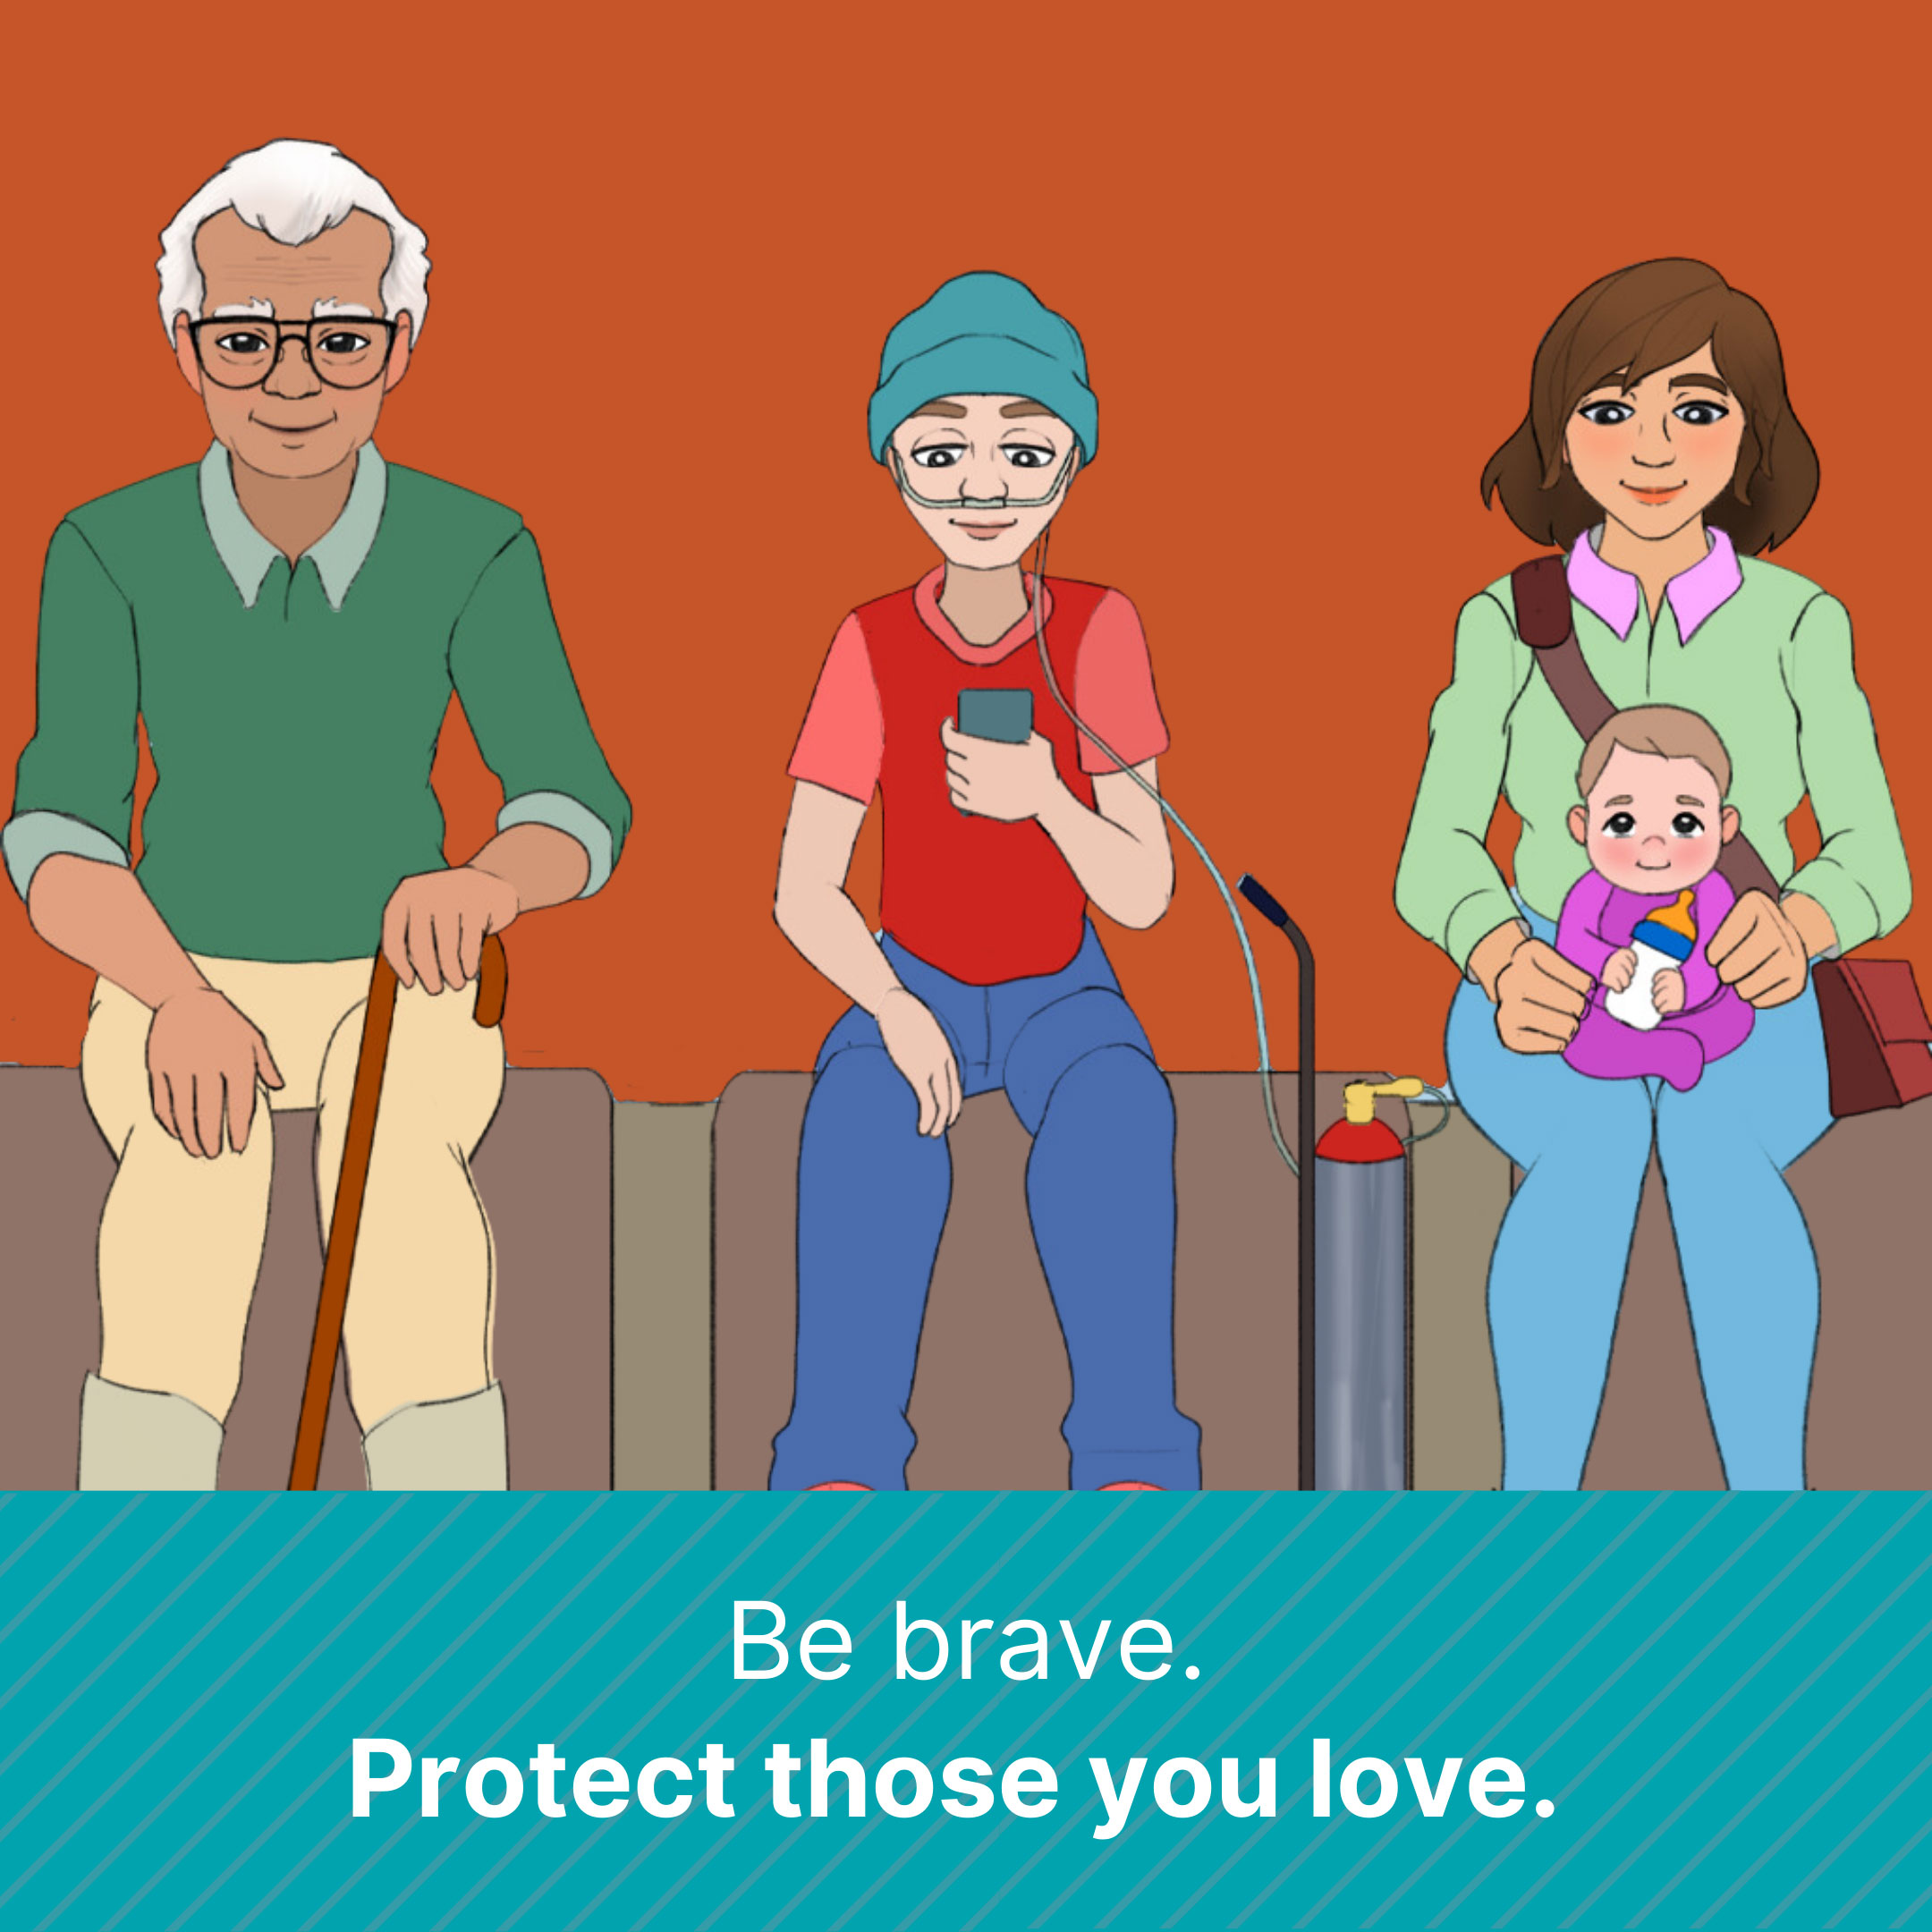 Group of people of different ages and conditions in a waiting line, sitting next to each other. Text says: Be brave. Protect those you love.